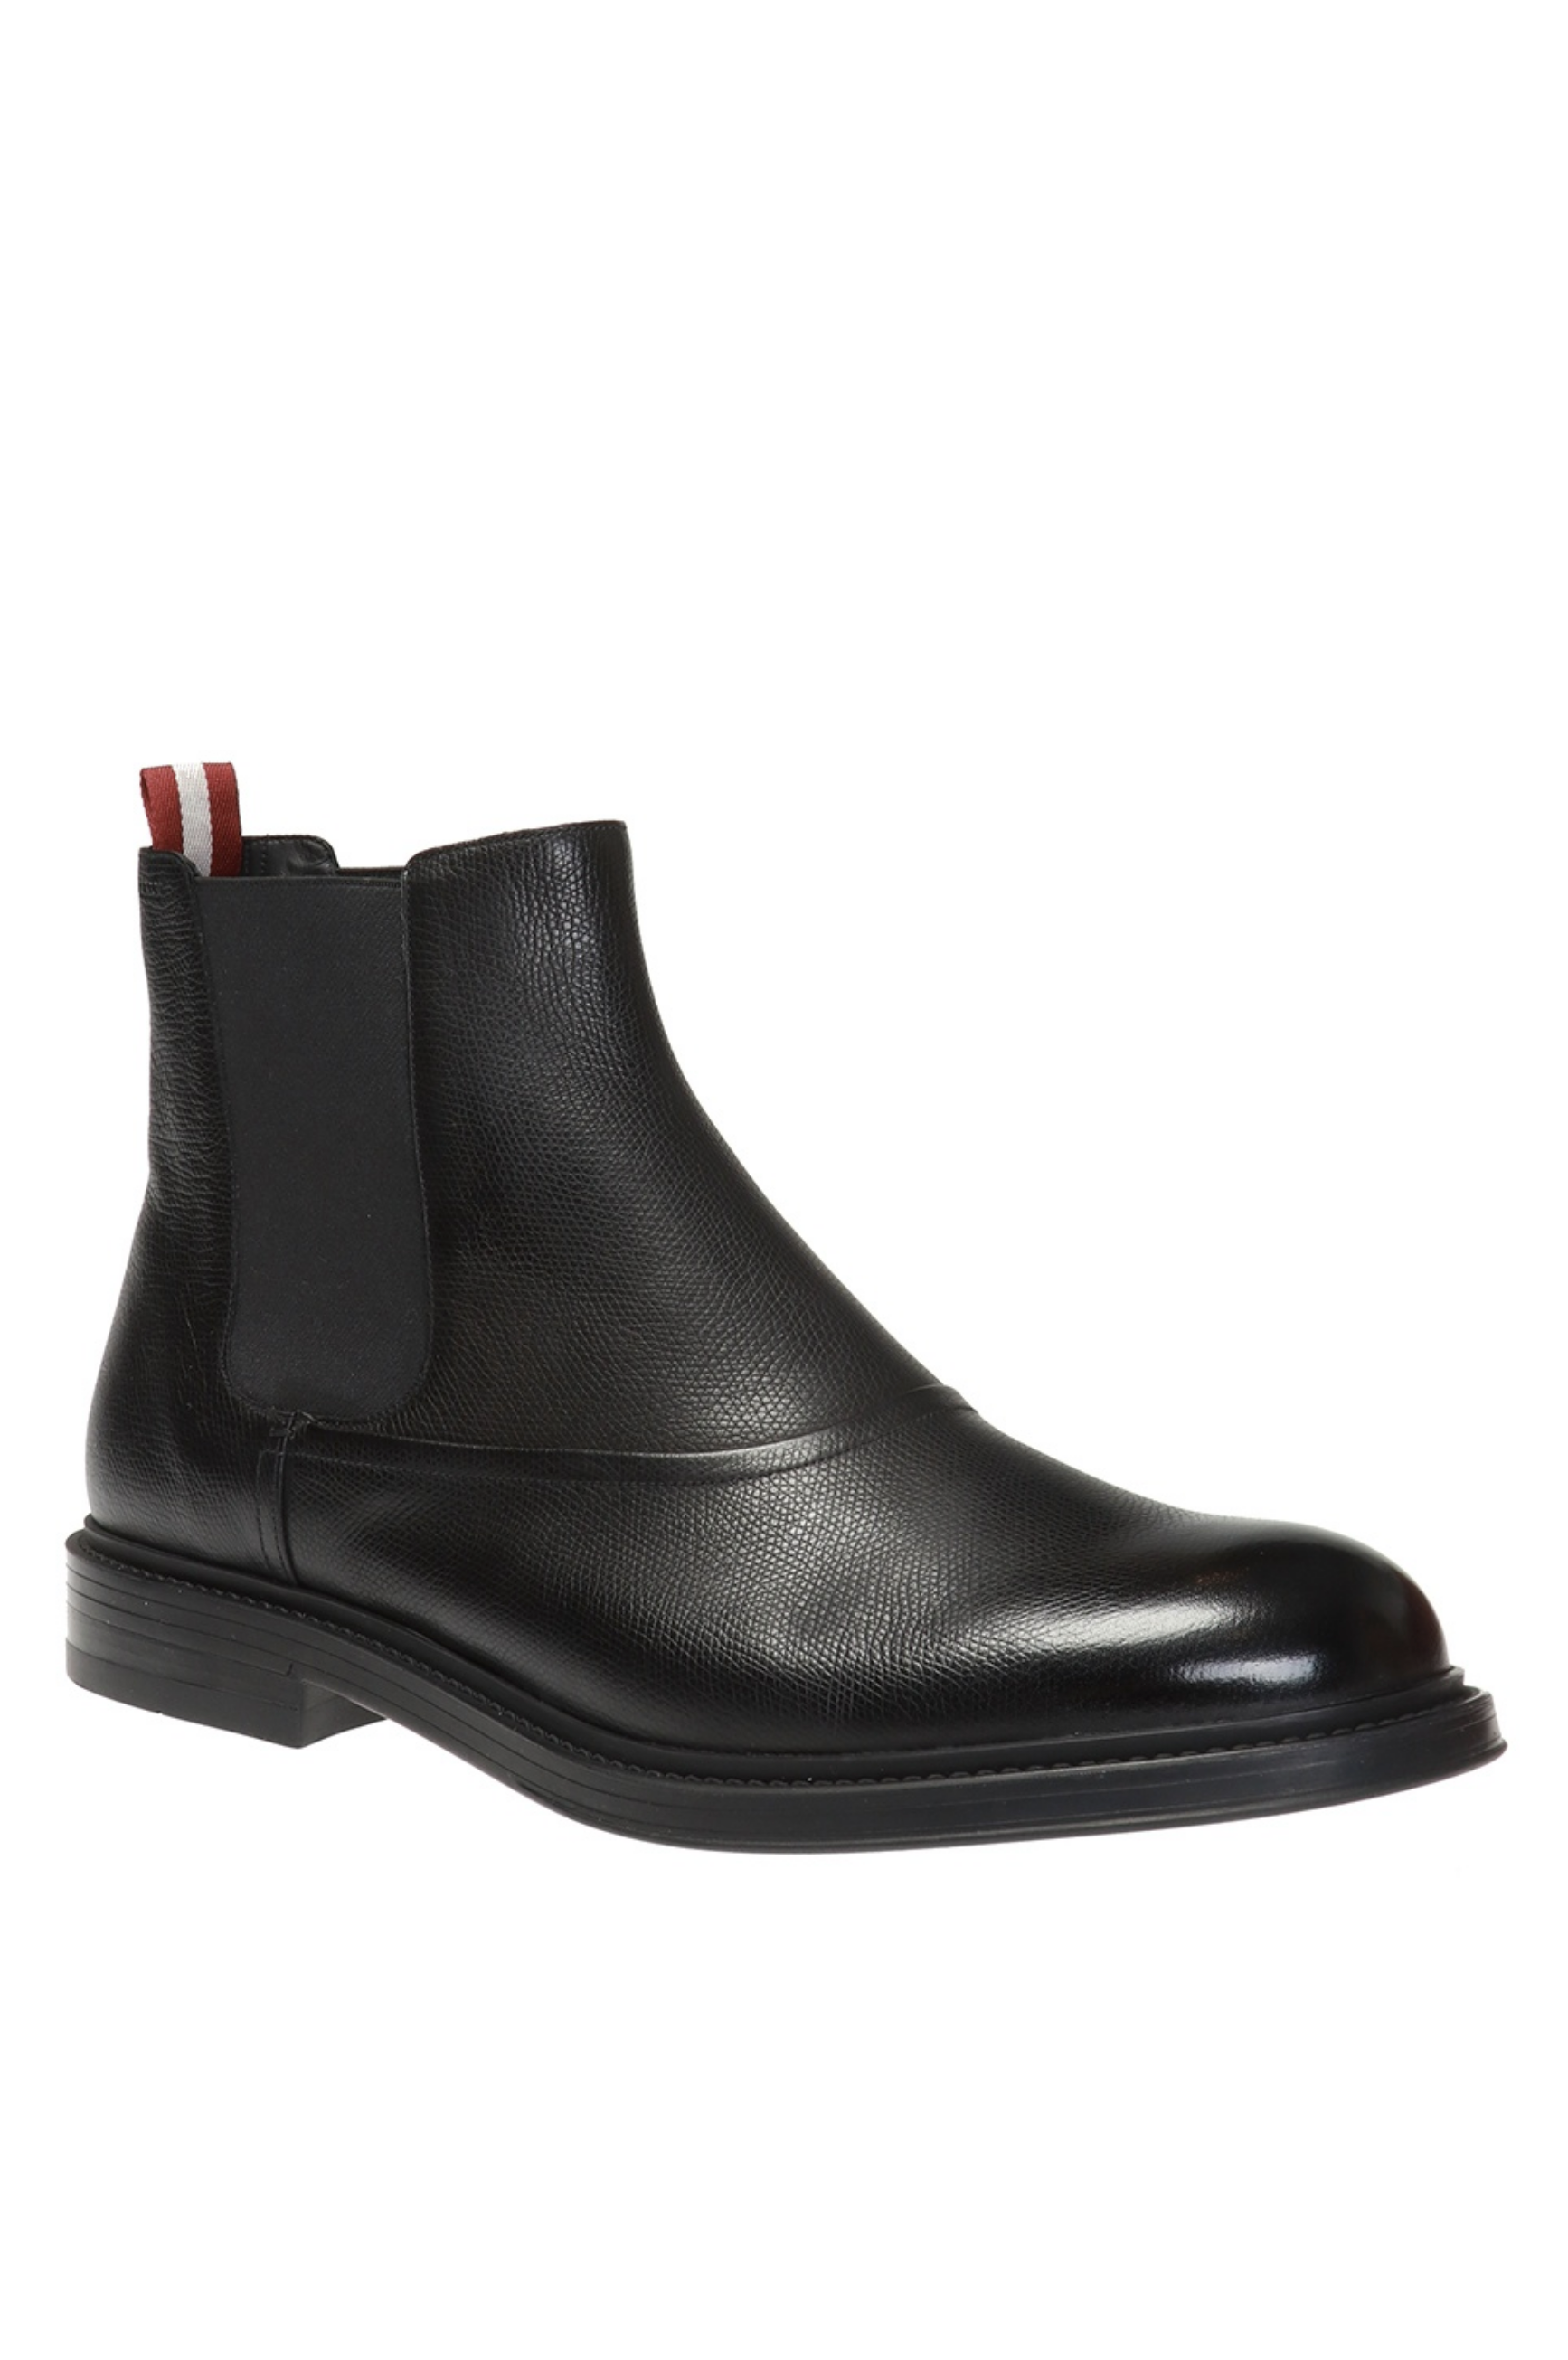 BALLY NIKORA CALF GRAINED BLACK LEATHER ANKLE BOOTS